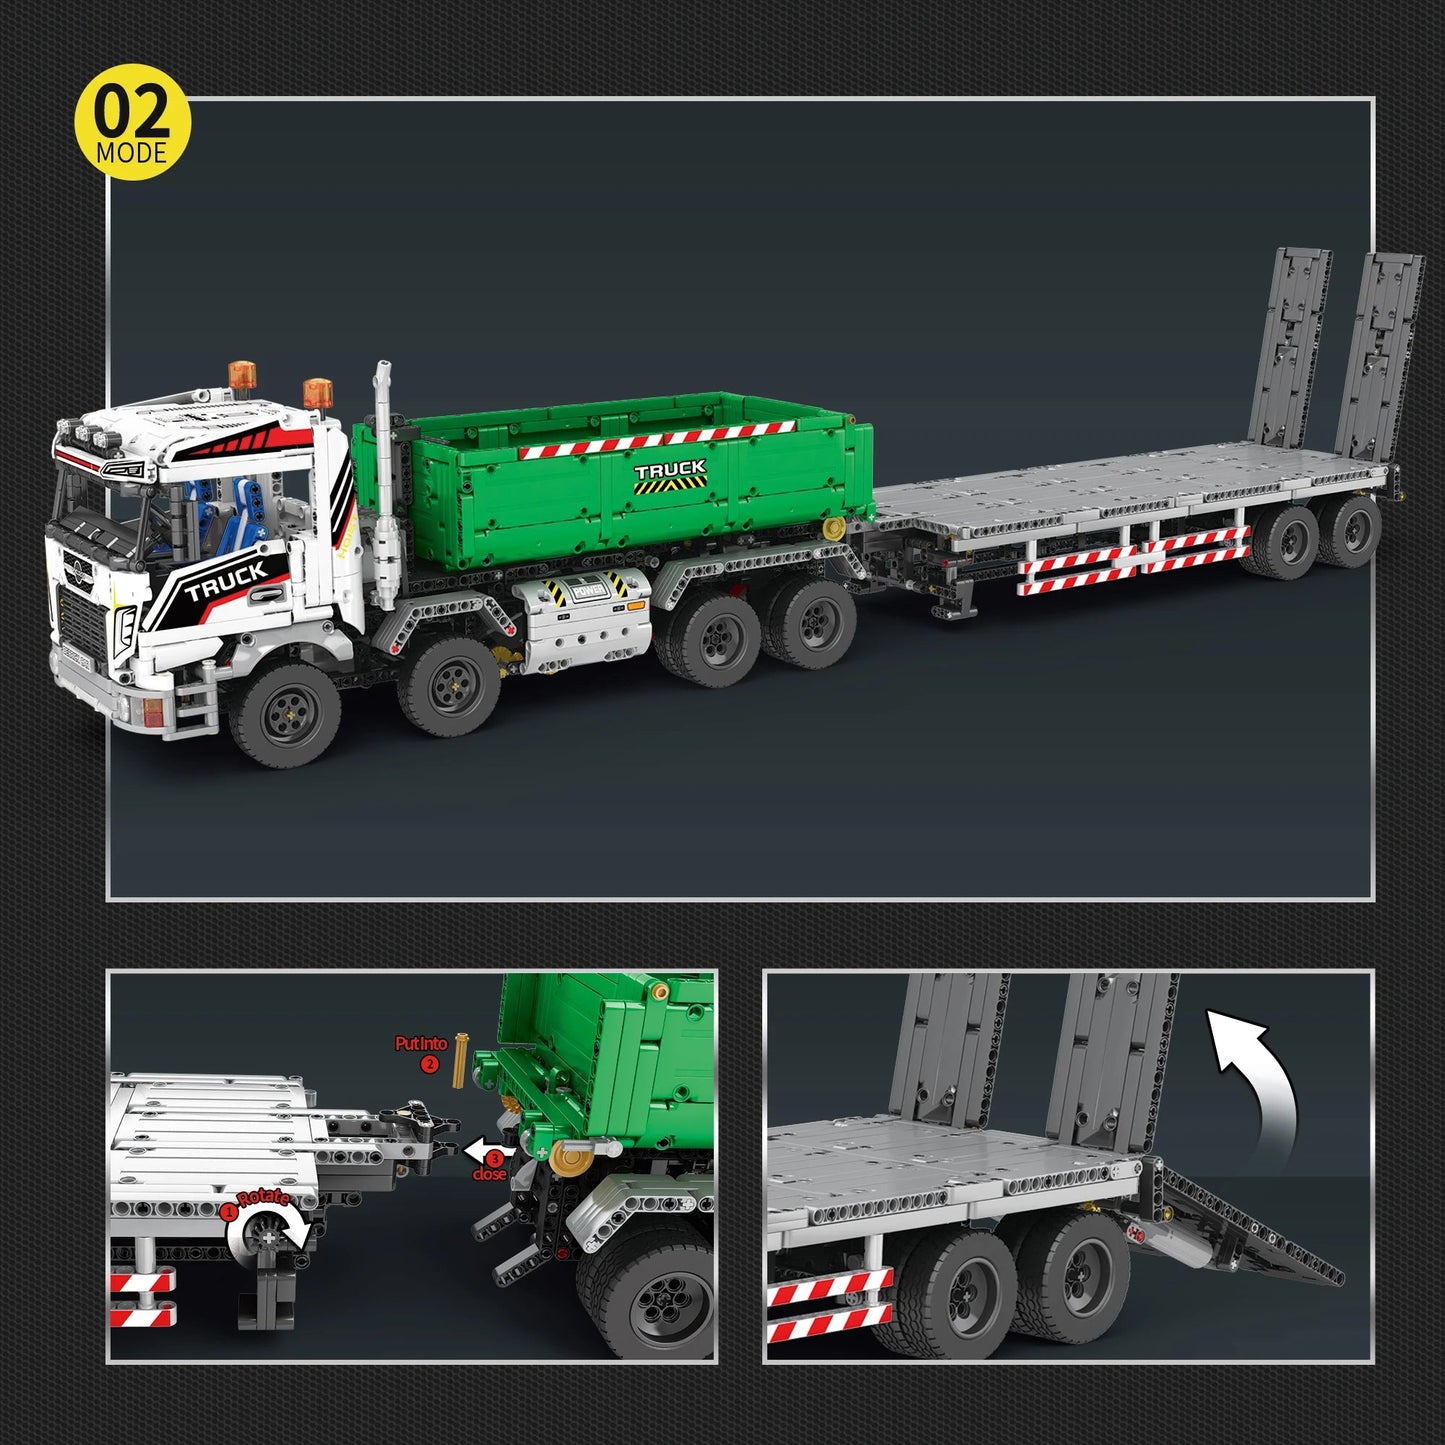 Electric Truck Crane Building Block Set for Adults with Remote Control - ToylandEU